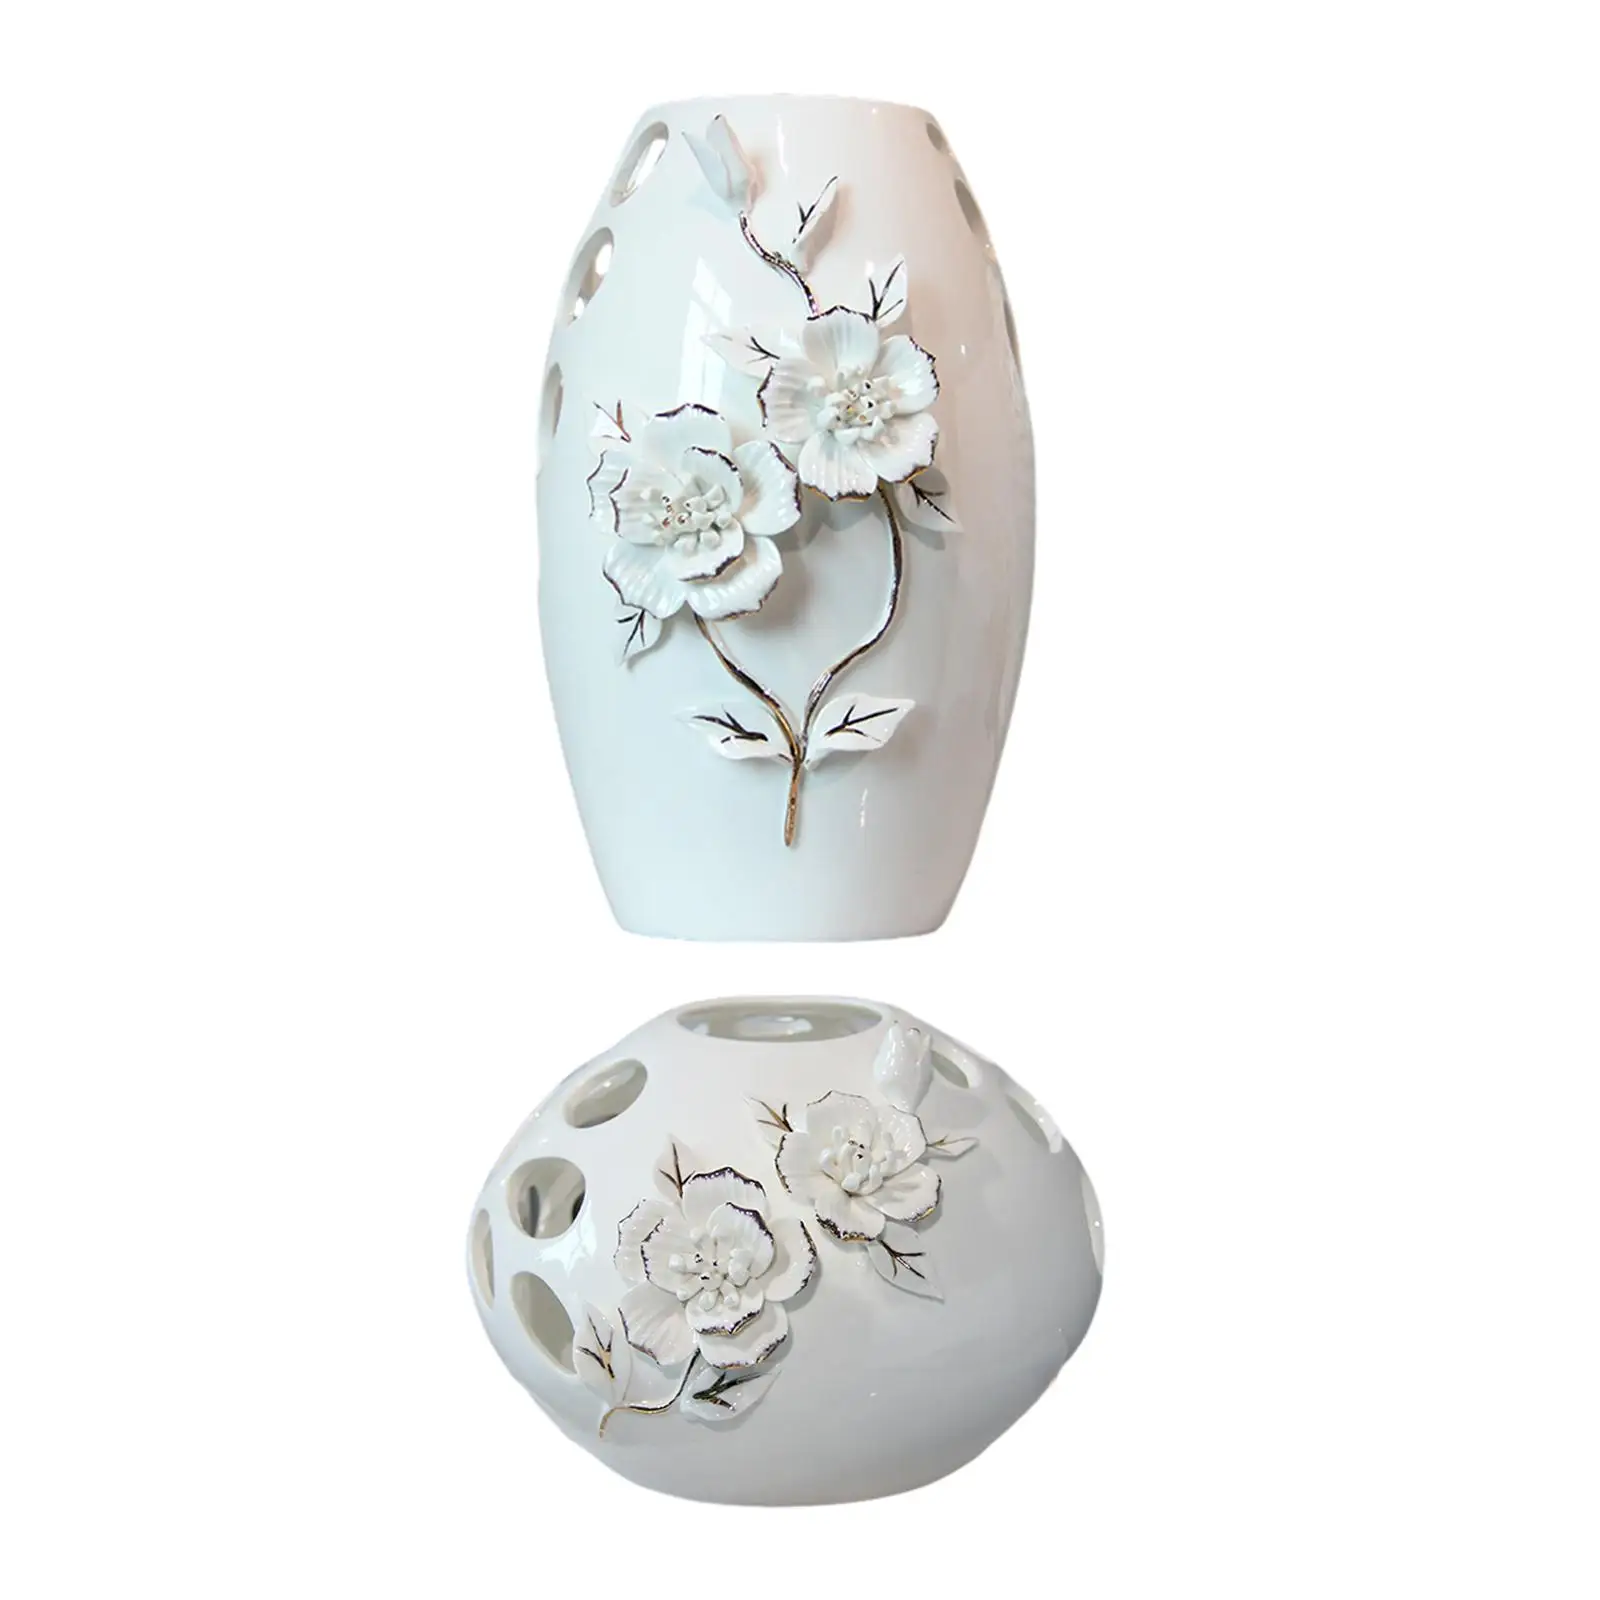 White Ceramic Vase Table Ornament Hollow Out for Mantel End Table Decor Fireplace Dresser Home Office Bedroom Multifunctional